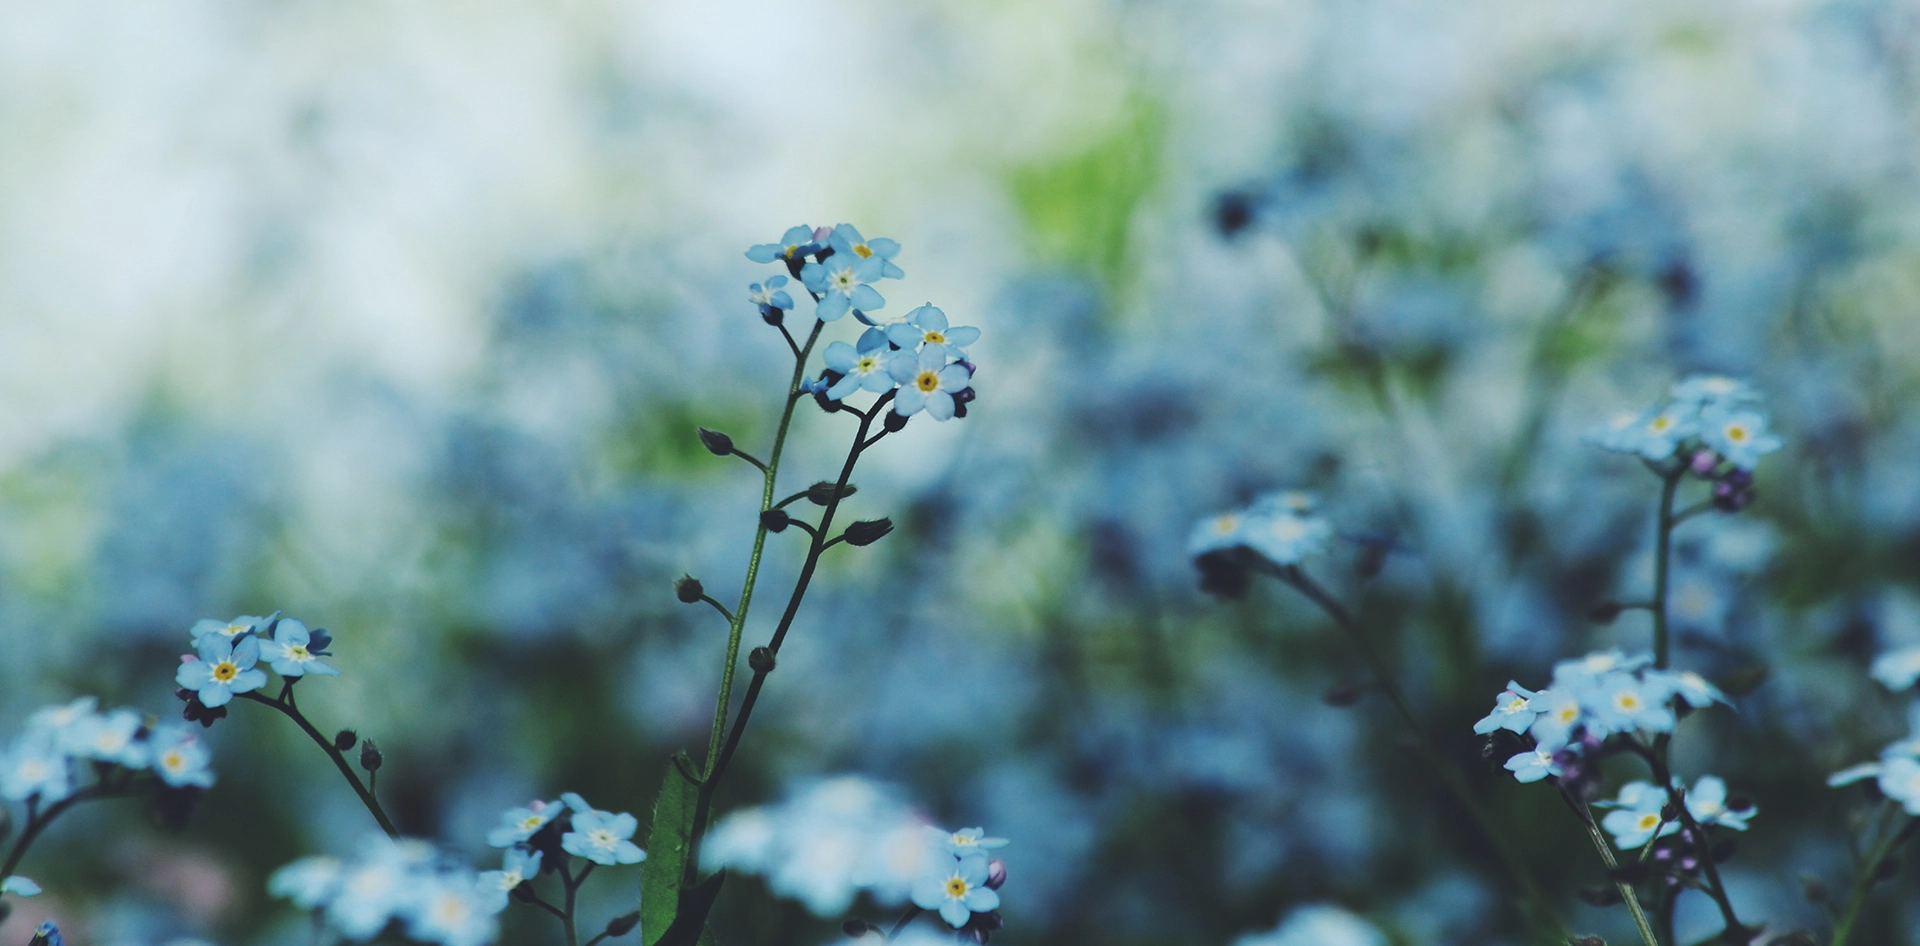 A field of Forget Me Not flowers